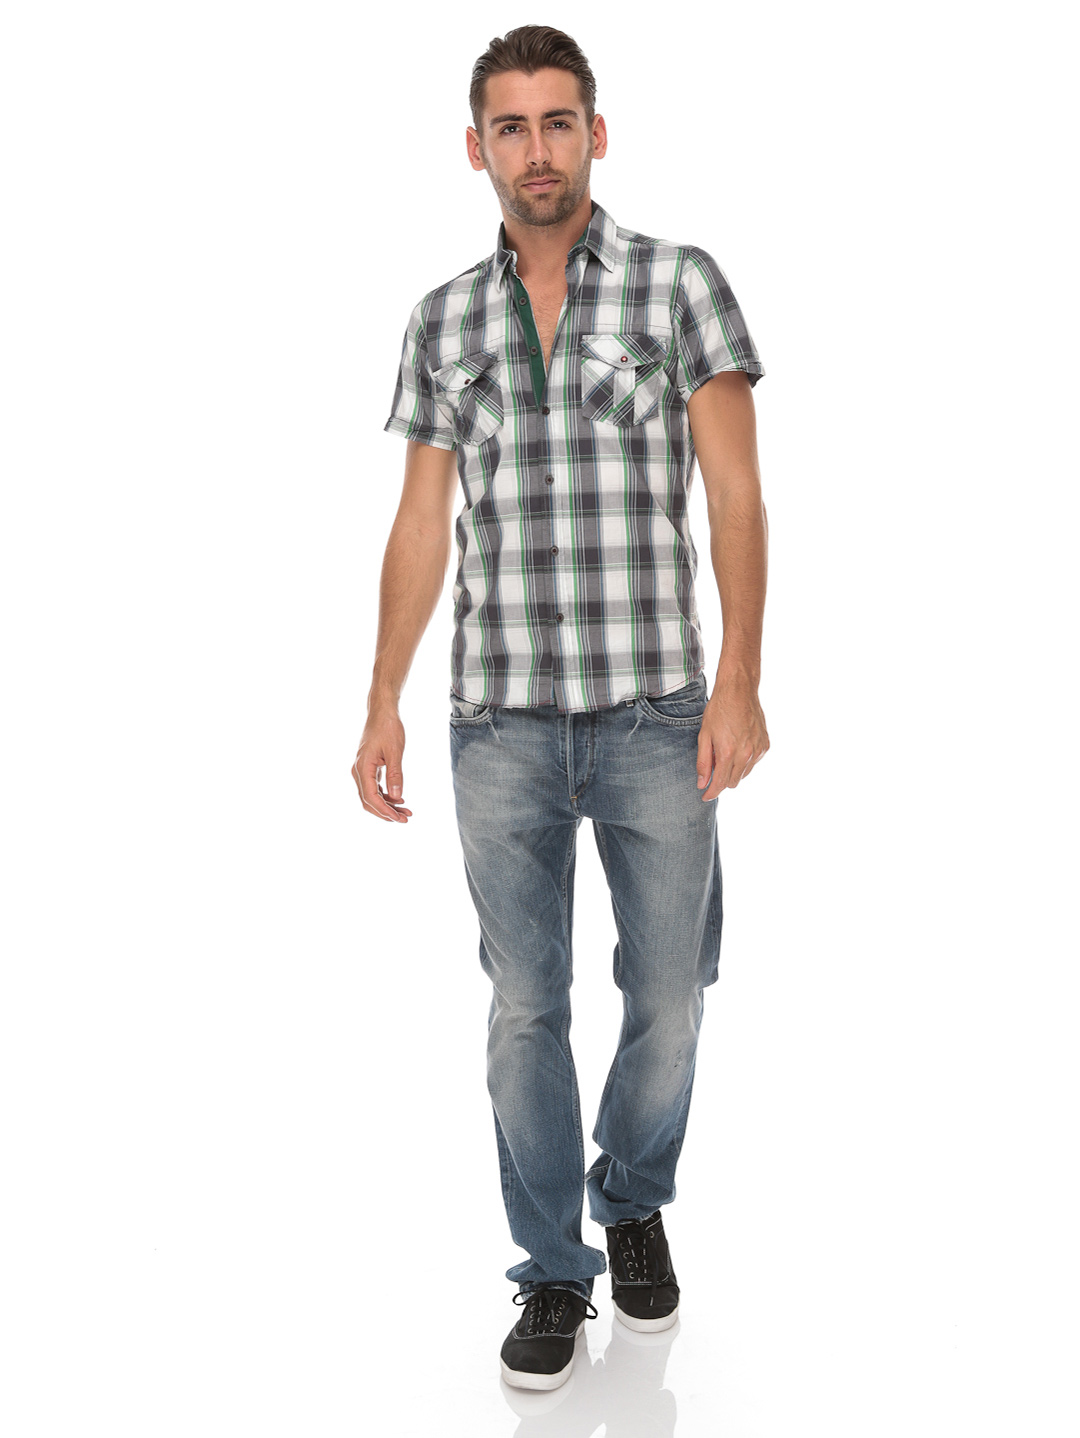 Men's Check Shirts Collection 2013-2014